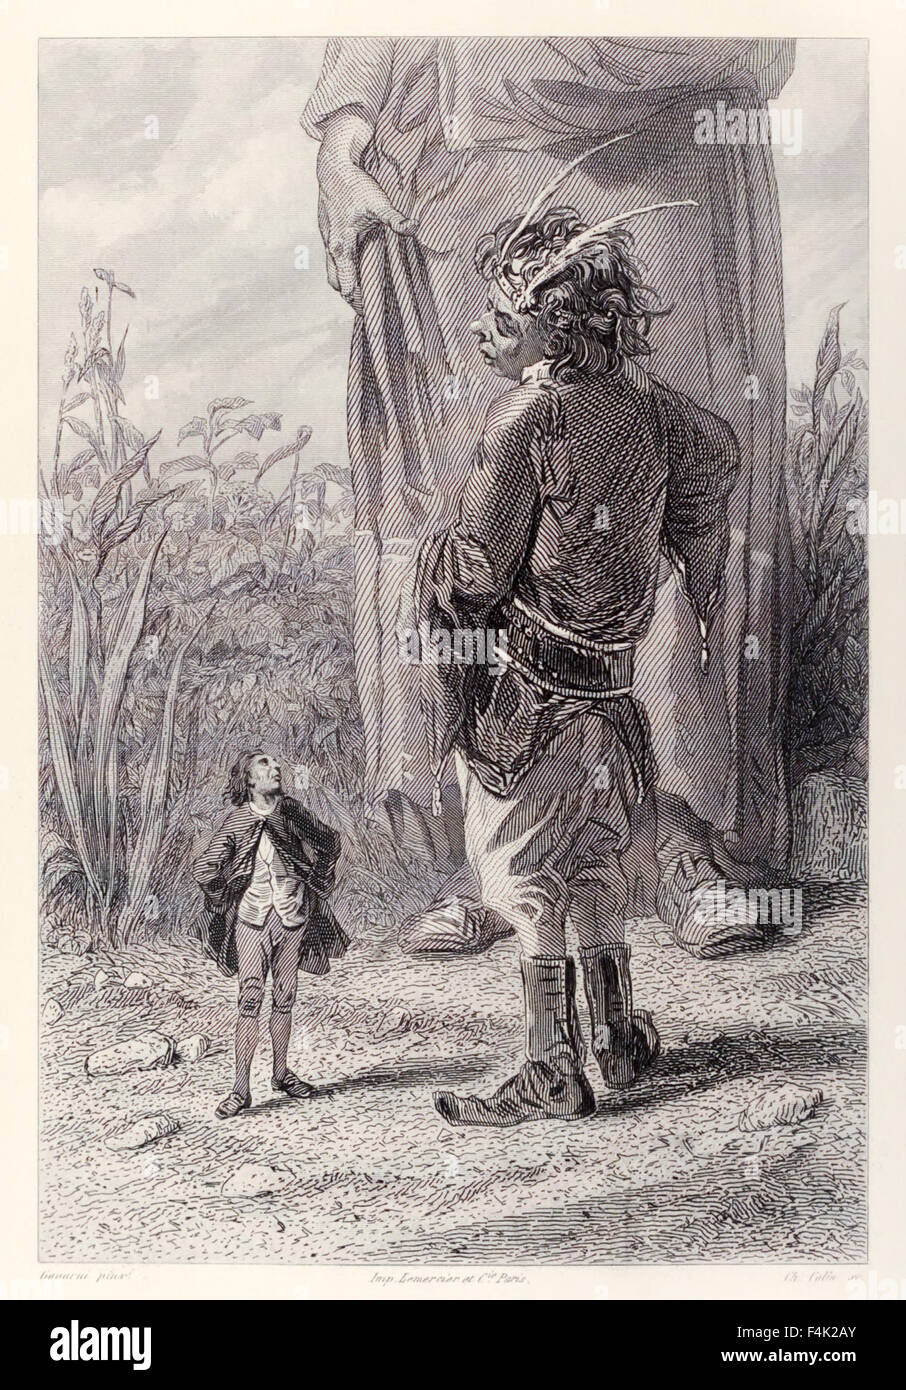 Gulliver meets the Queen's 30 foot tall dwarf who is delighted to have someone in court smaller than him to torment, from French Edition of 'Gulliver's Travels' by Jonathan Swift (1667-1745), illustration by Paul Gavarni (1804-1866). See description for more information. Stock Photo